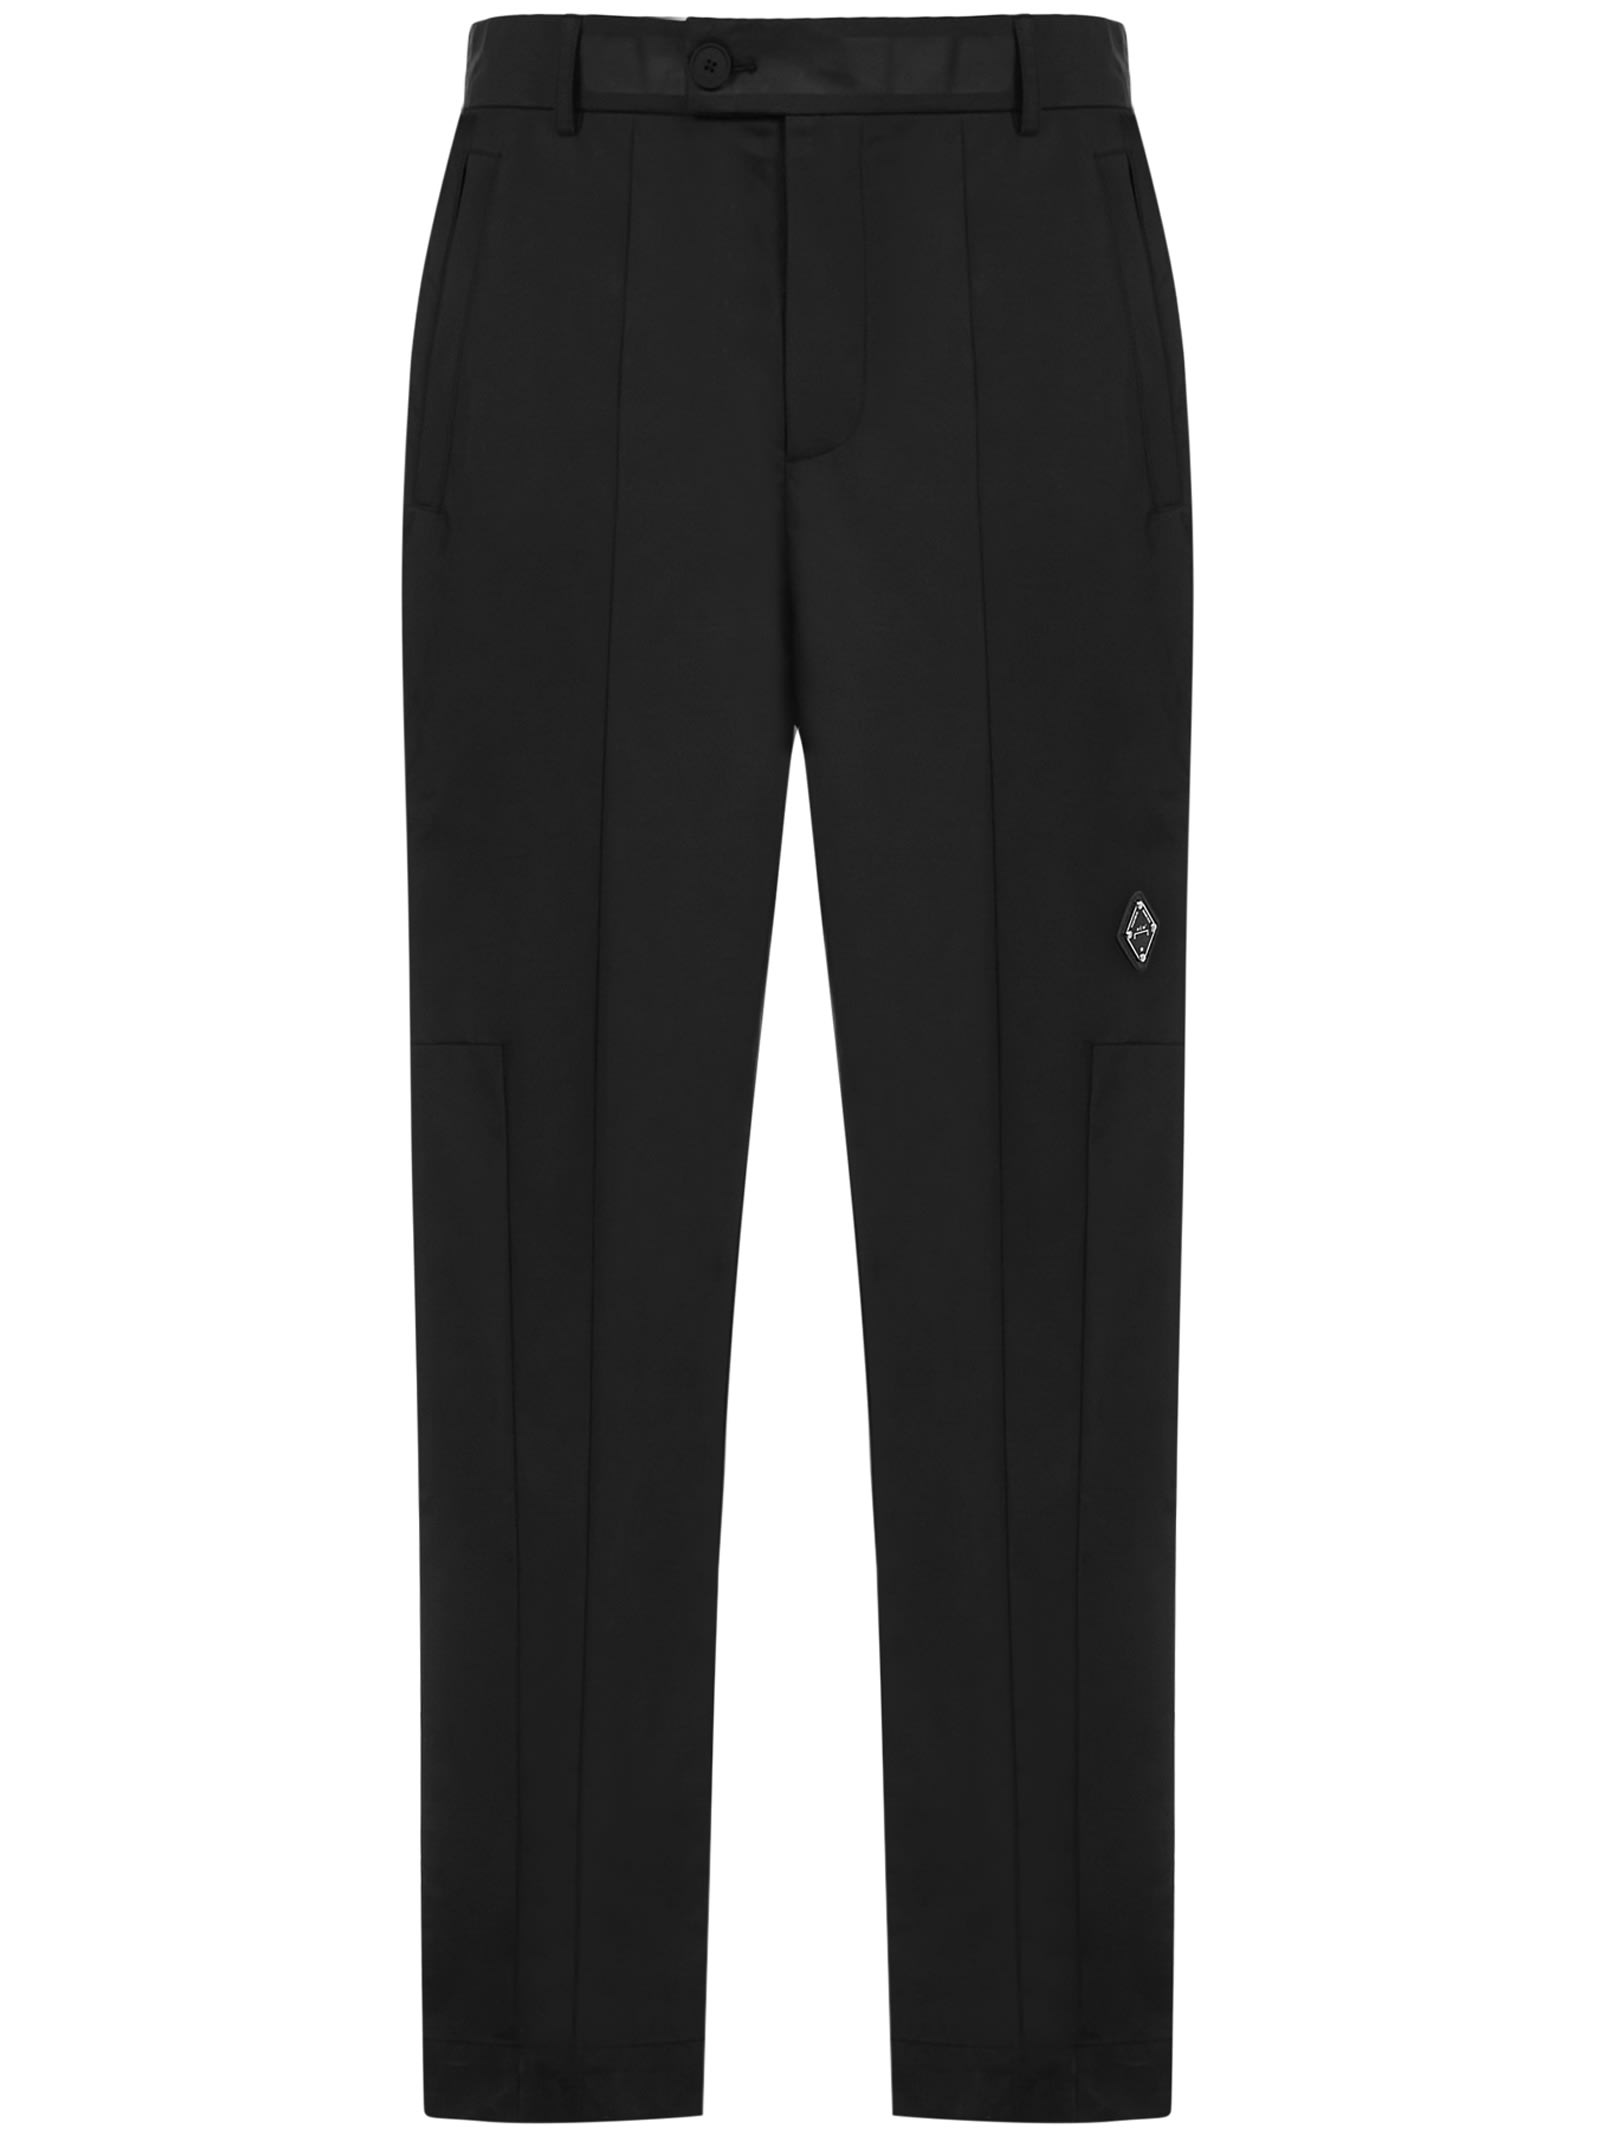 A-COLD-WALL* A COLD WALL ESSENTIAL TROUSERS,ACWMB047 BLACK